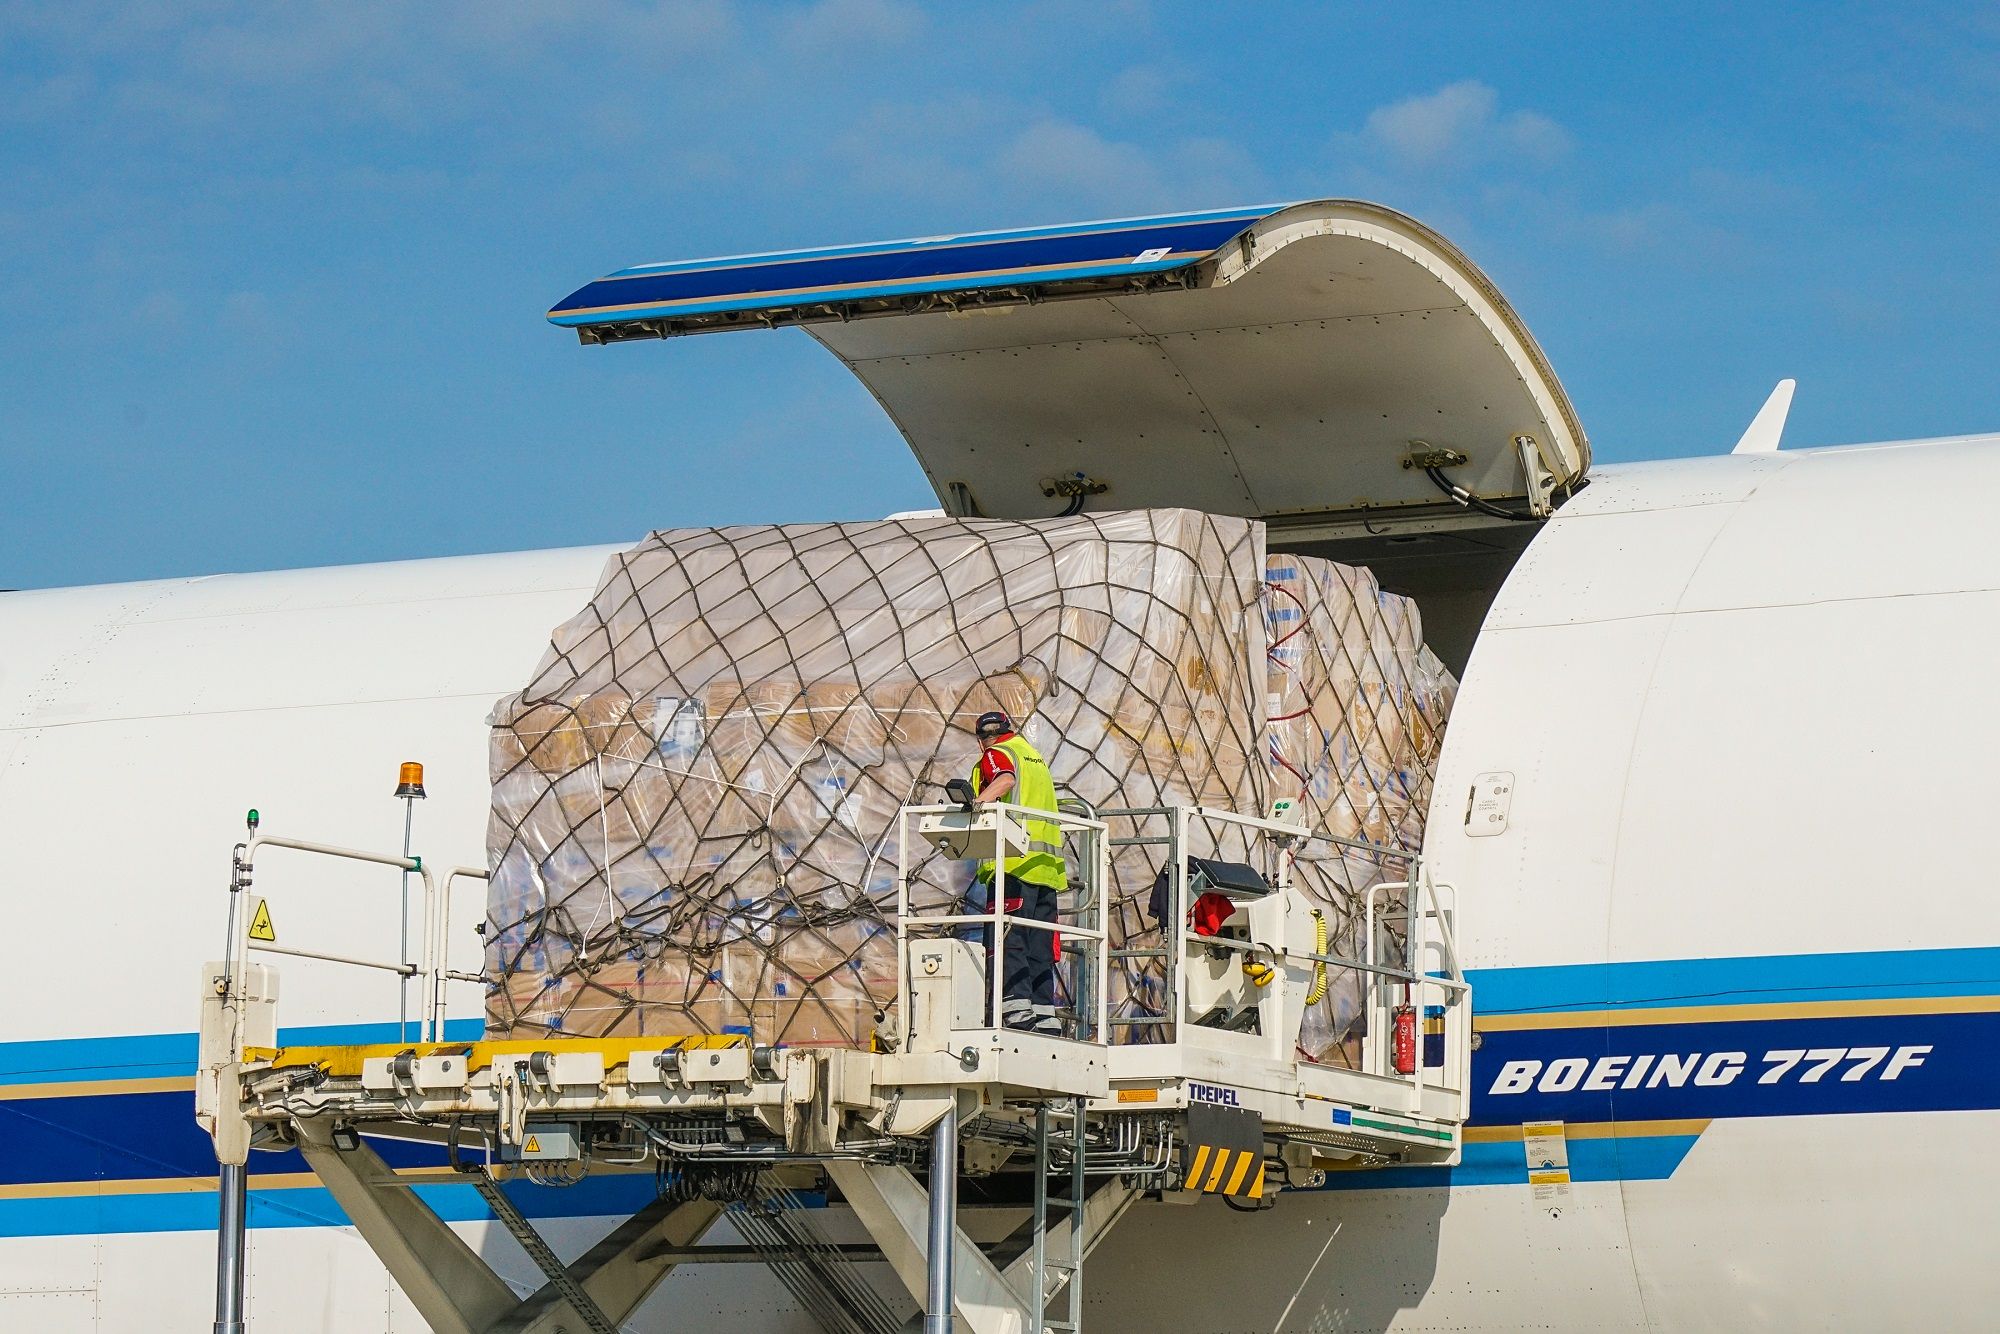 London Stansted Boeing 777F Cargo Loading